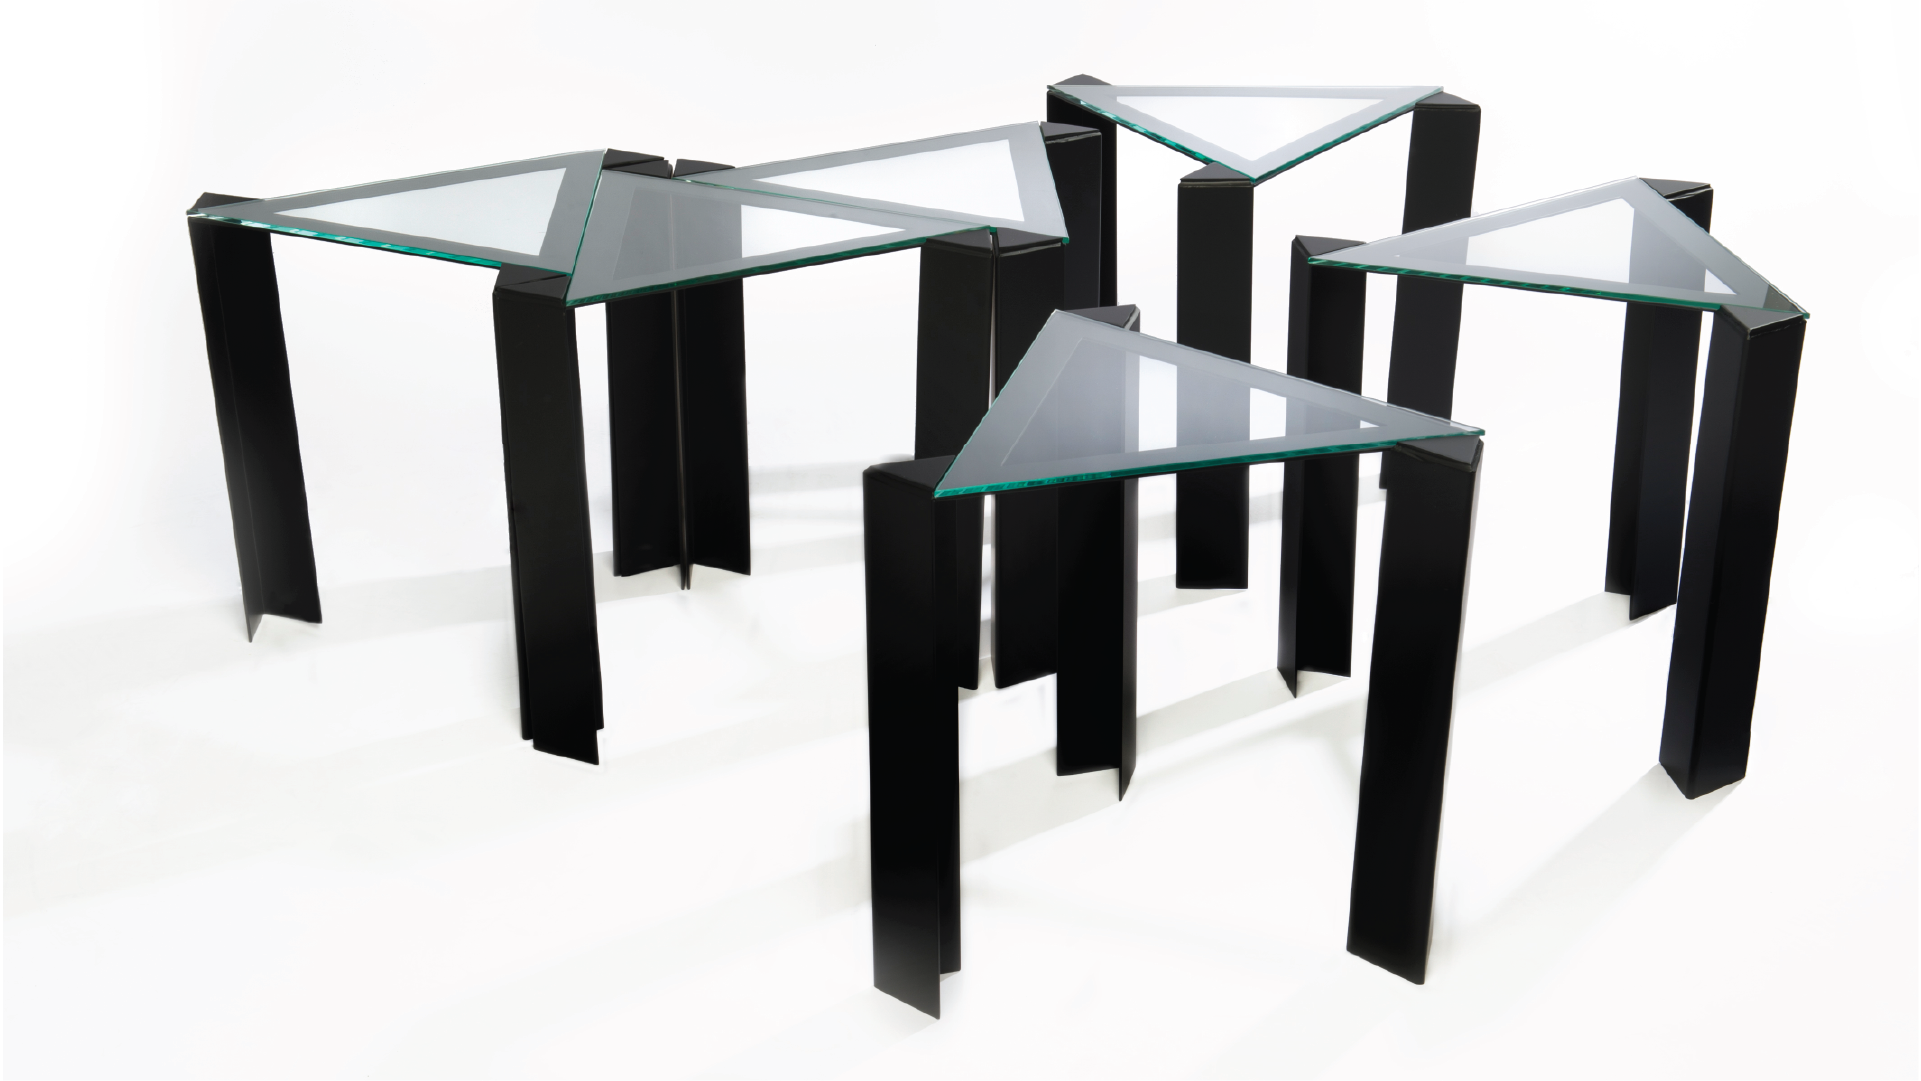 A series of six stainless steel tables in a triangular shape with glass tabletops. The tables are all spread out.